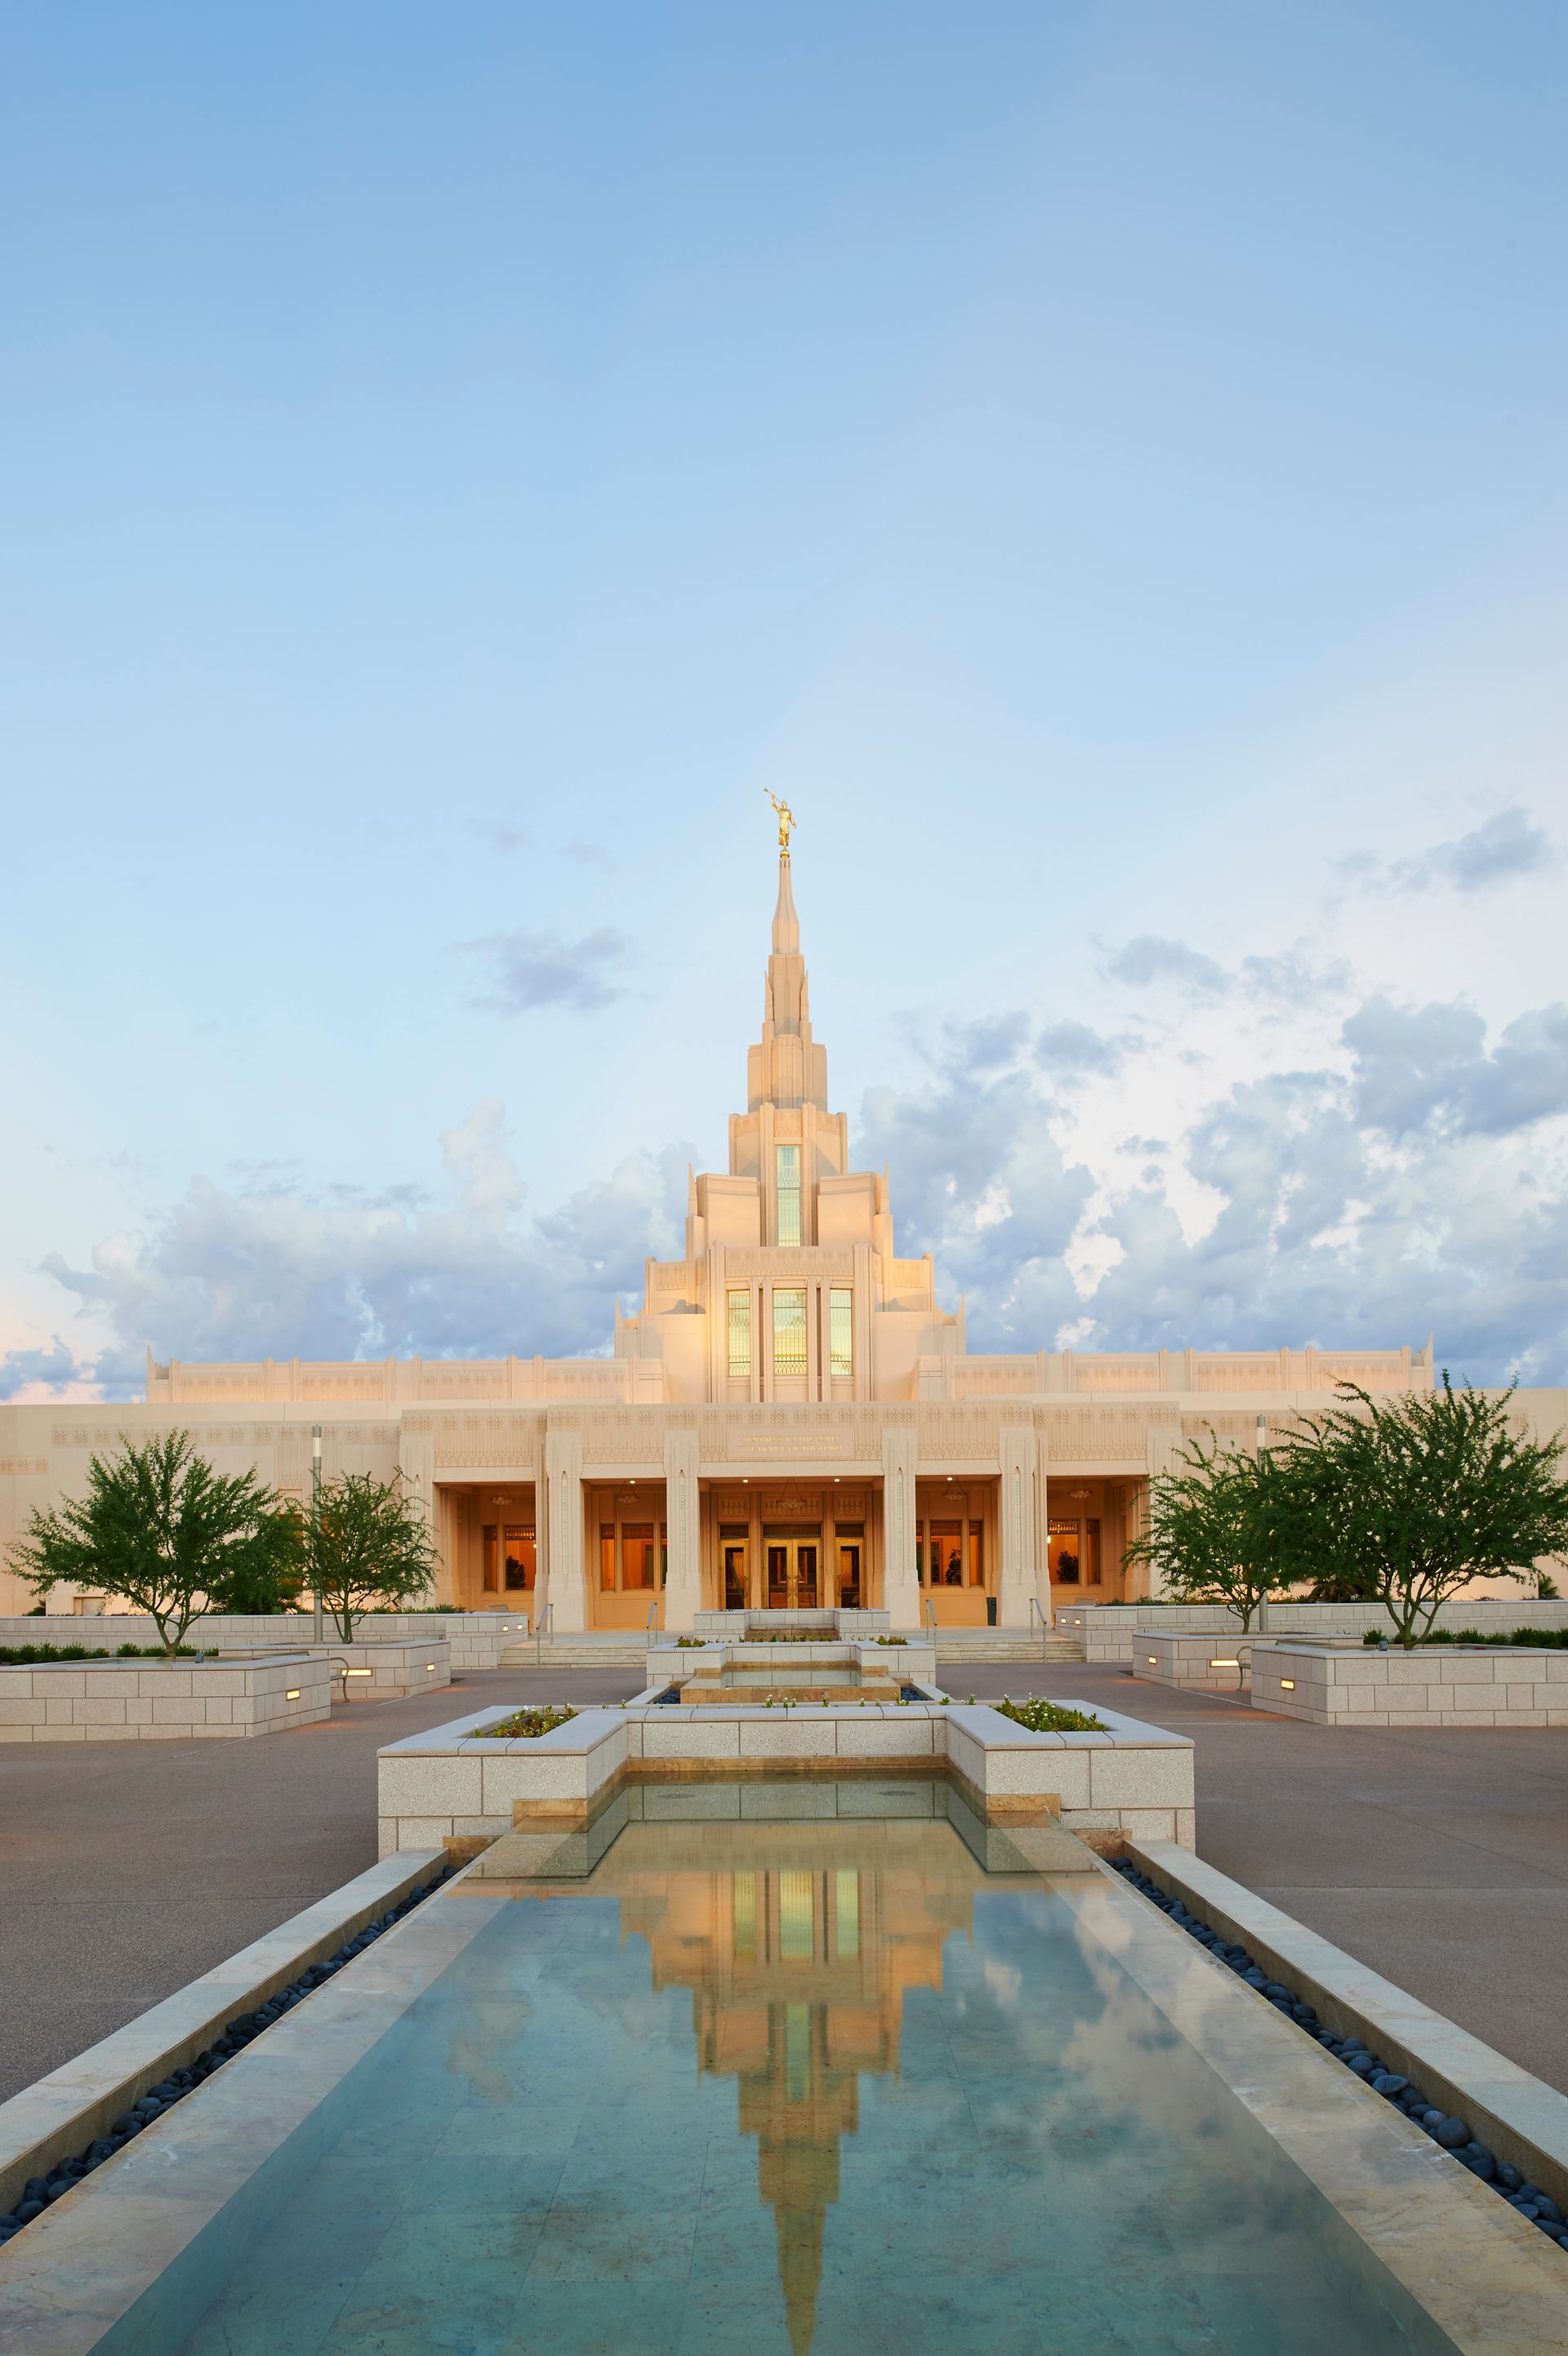 The Phoenix Arizona Temple entrance, including the water fountain.  